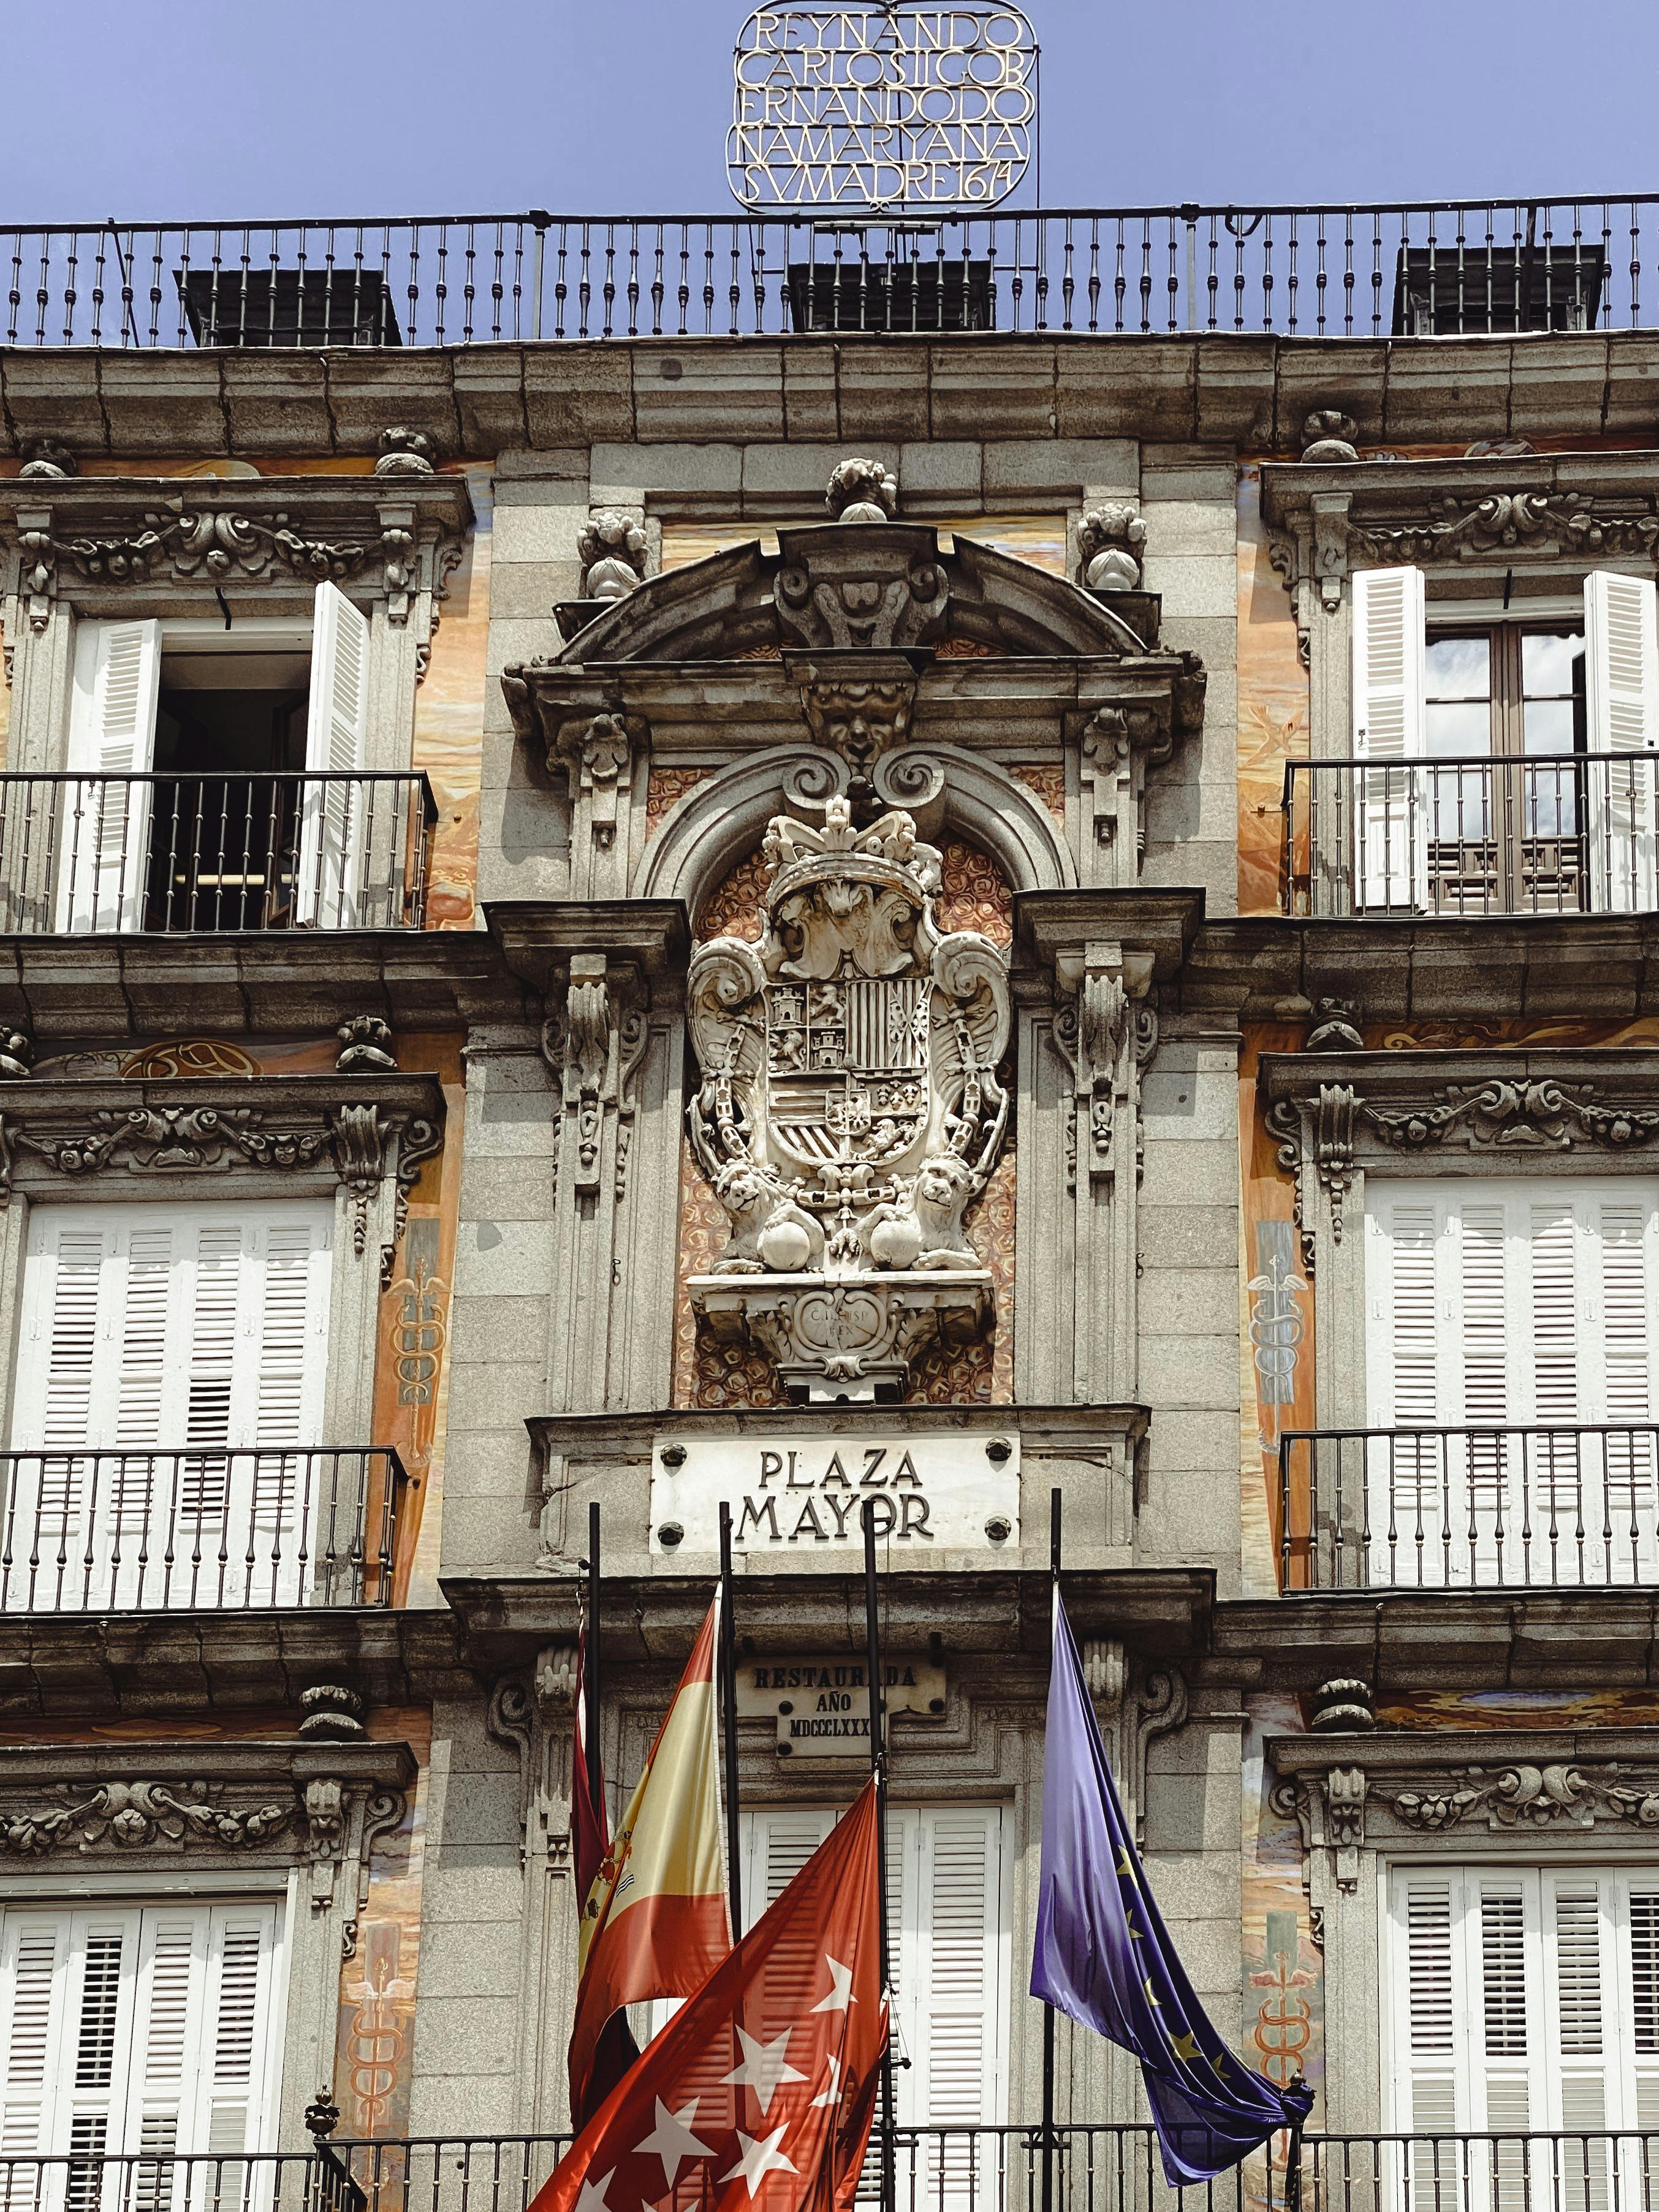 close up of the plaza mayor in madrid spain